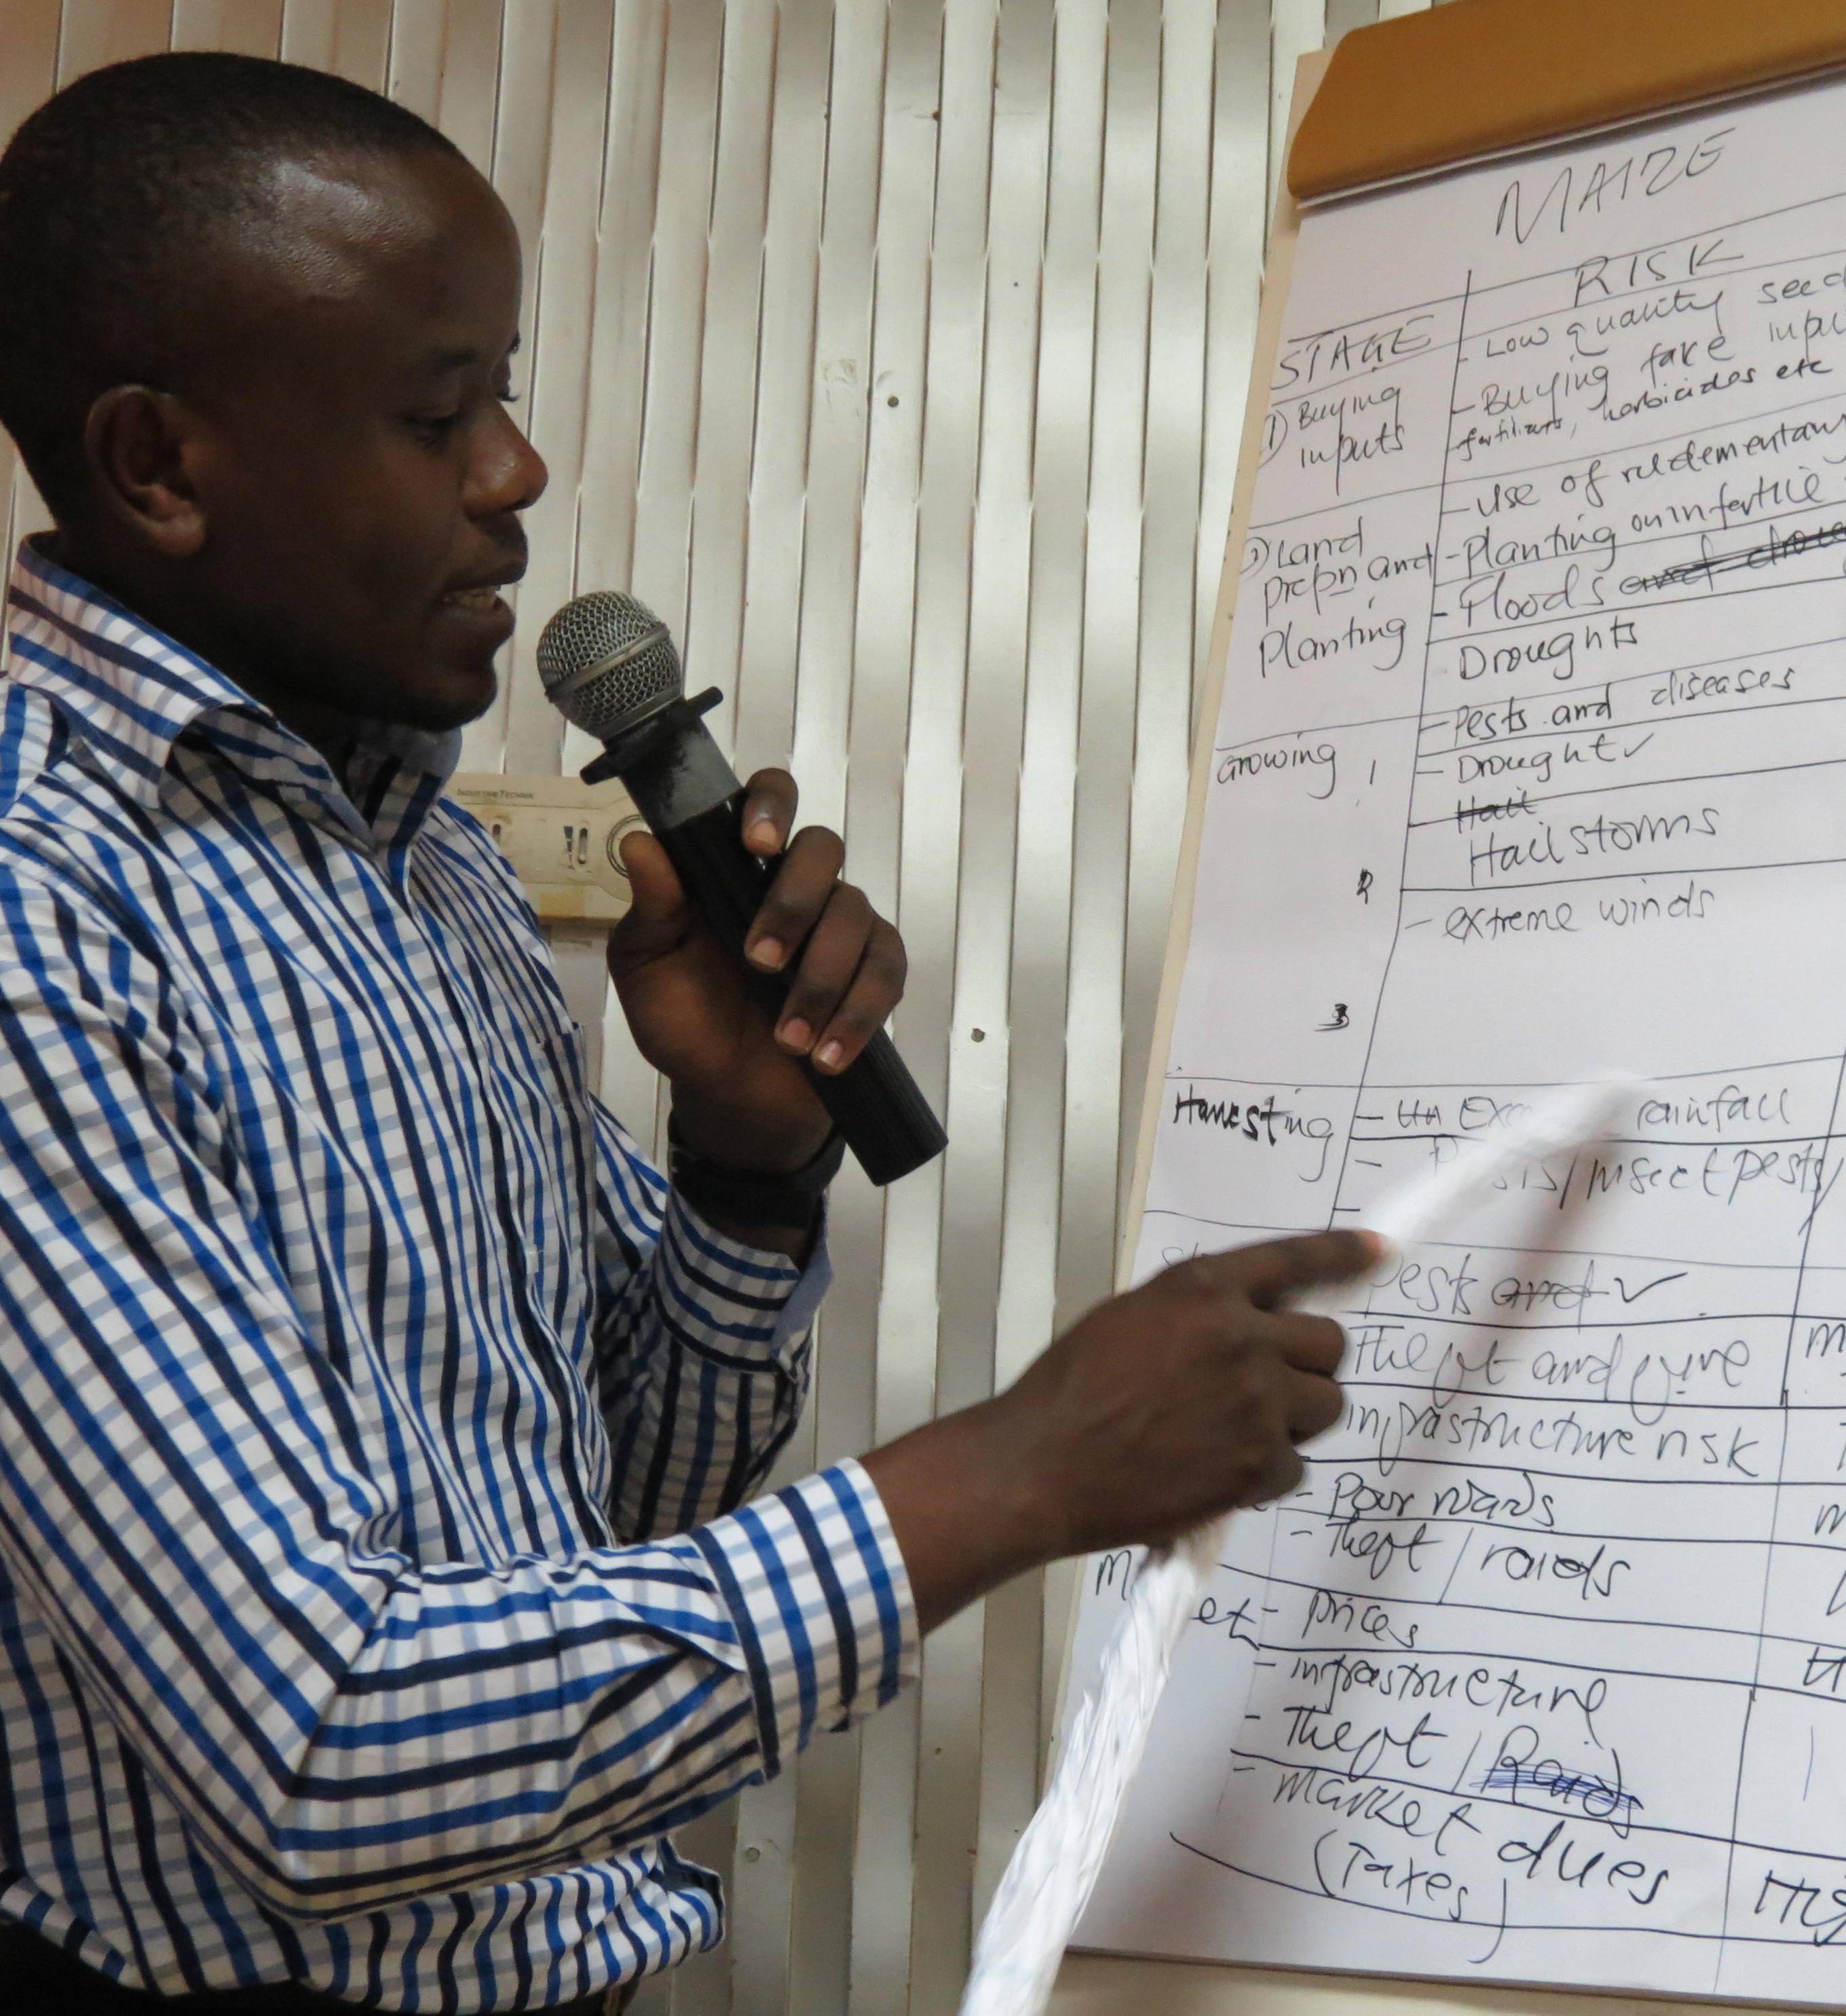 Agricultural Risk Management at the centre of the discussions in Uganda